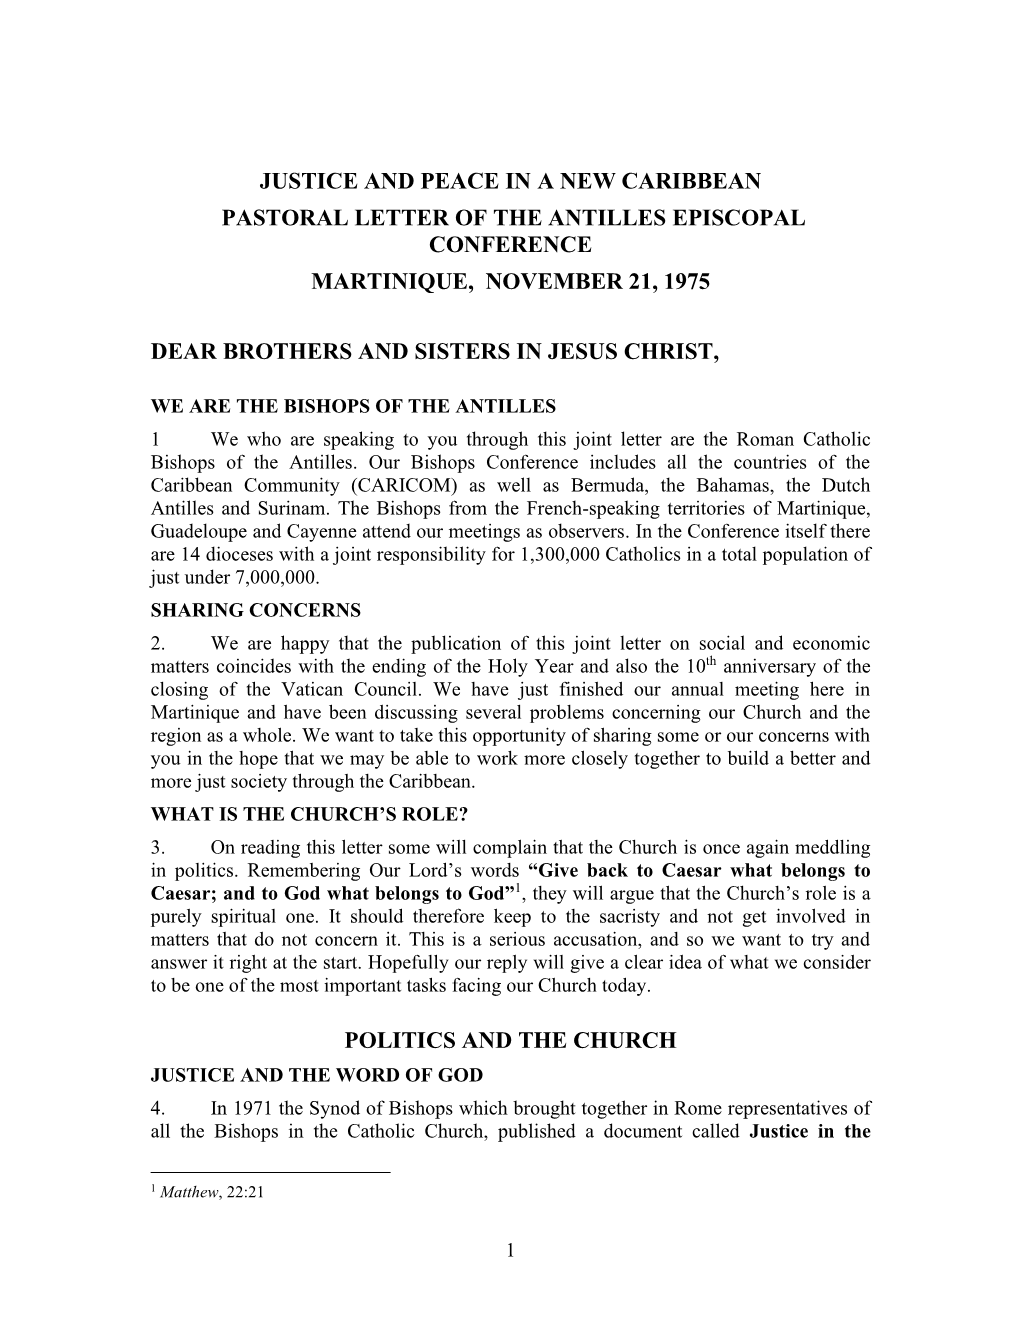 Justice and Peace in a New Caribbean Pastoral Letter of the Antilles Episcopal Conference Martinique, November 21, 1975